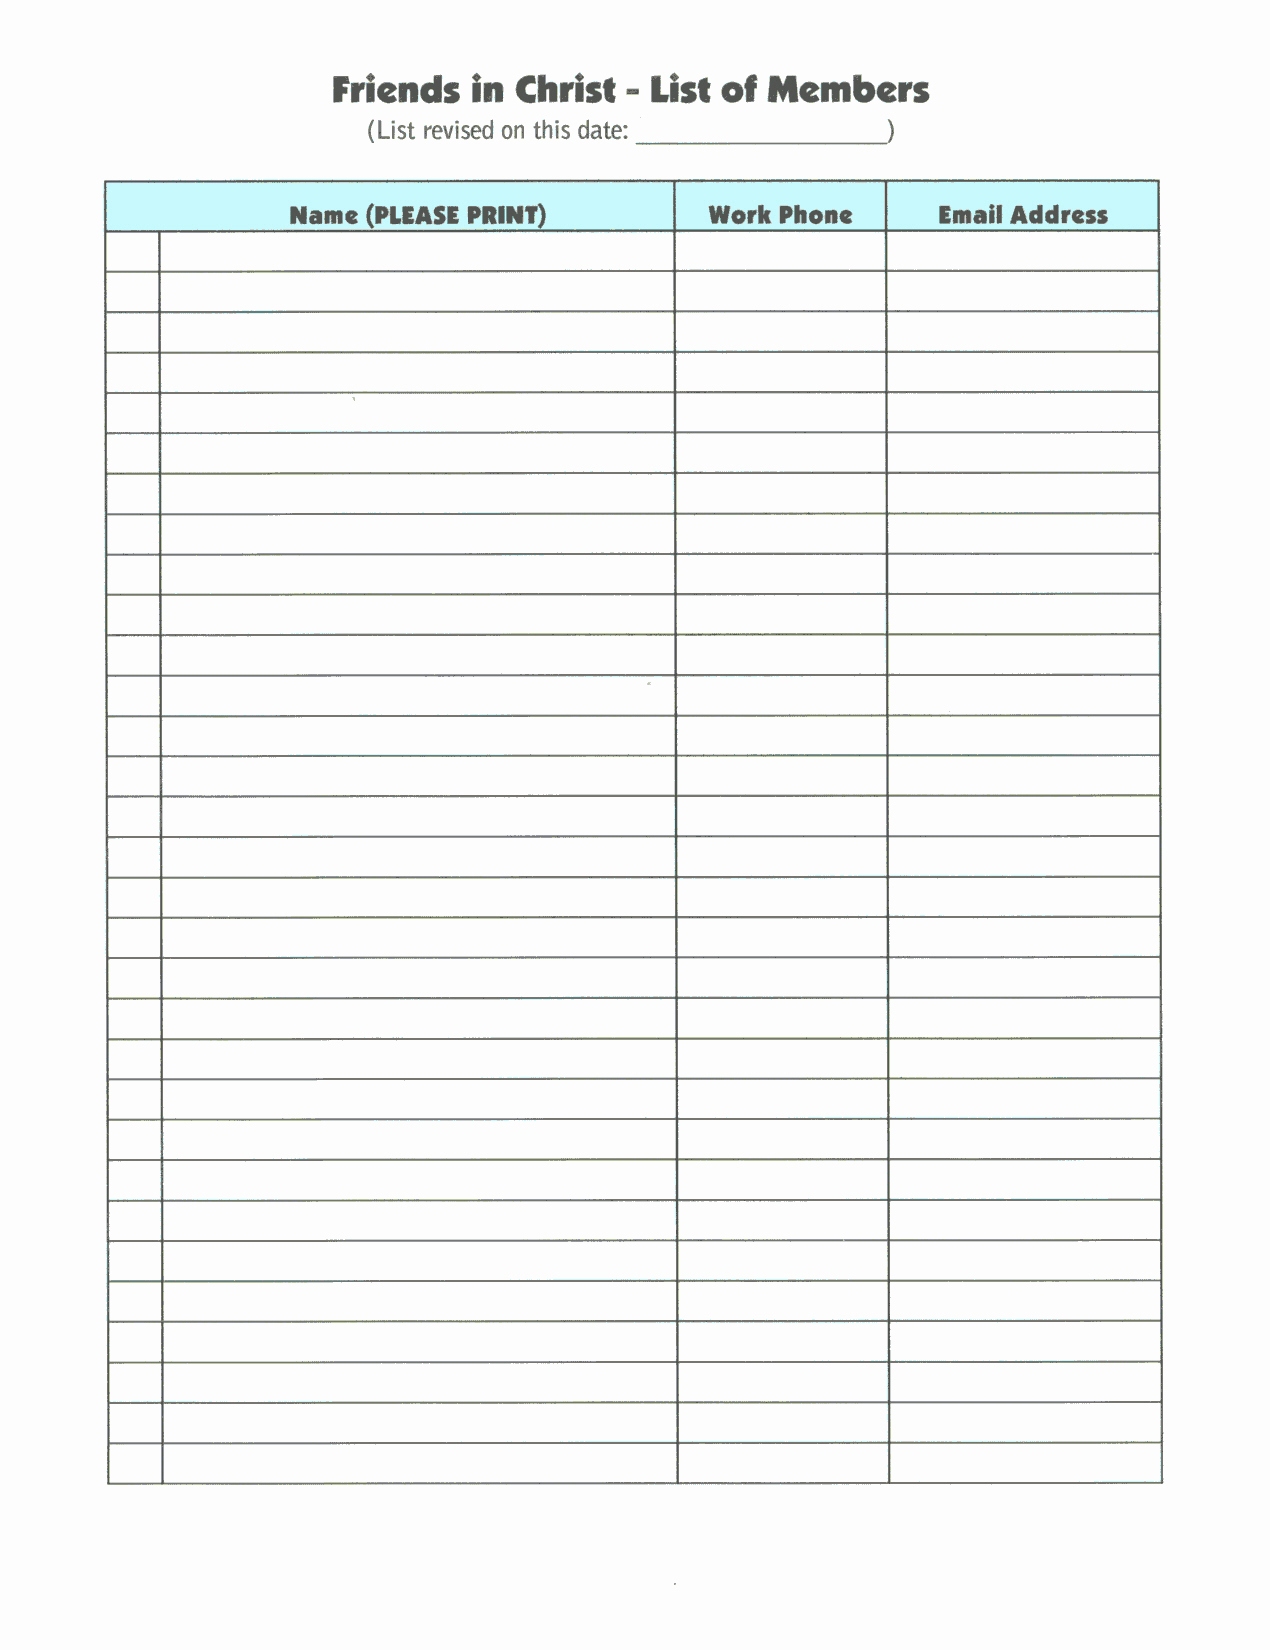 Sign Up Sheet Pdf Beautiful 4 Free Sign Up Sheet Templates Word Excel Pdf formats